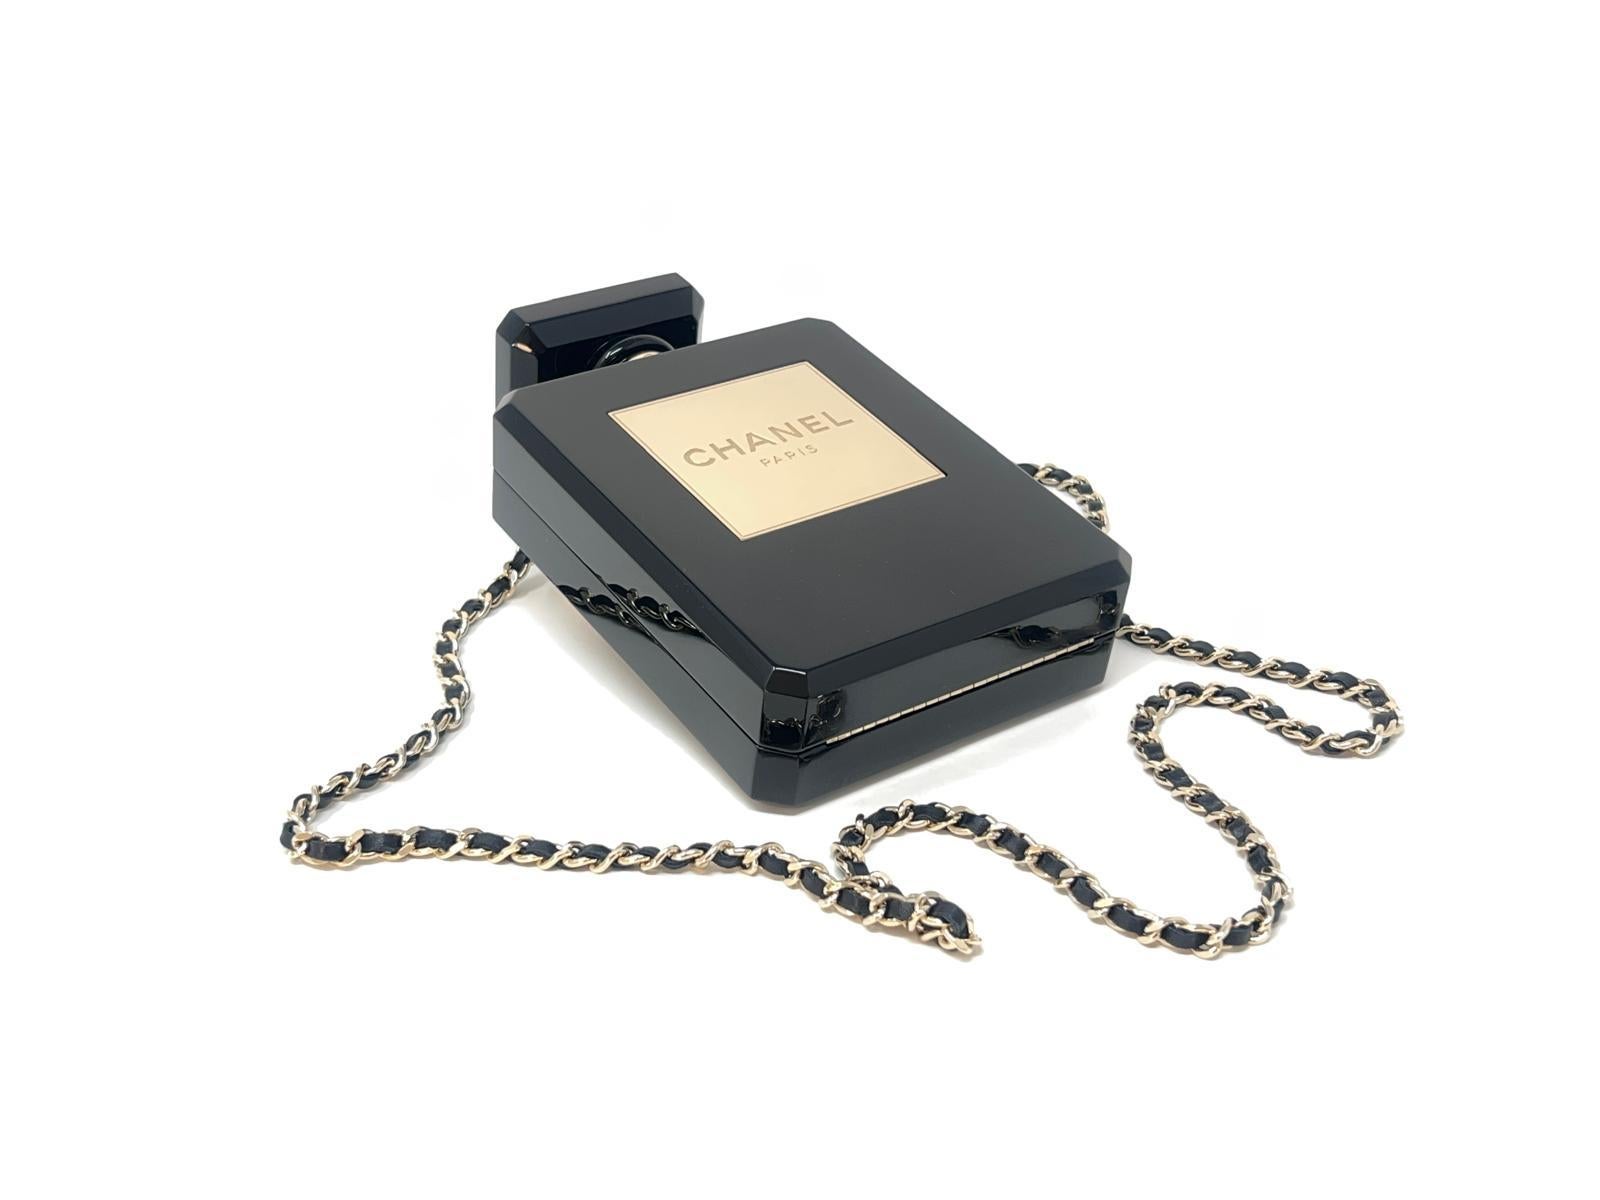 Chanel N5 Black Perfume Bottle Minaudière Cruise Collection 2013  For Sale 7